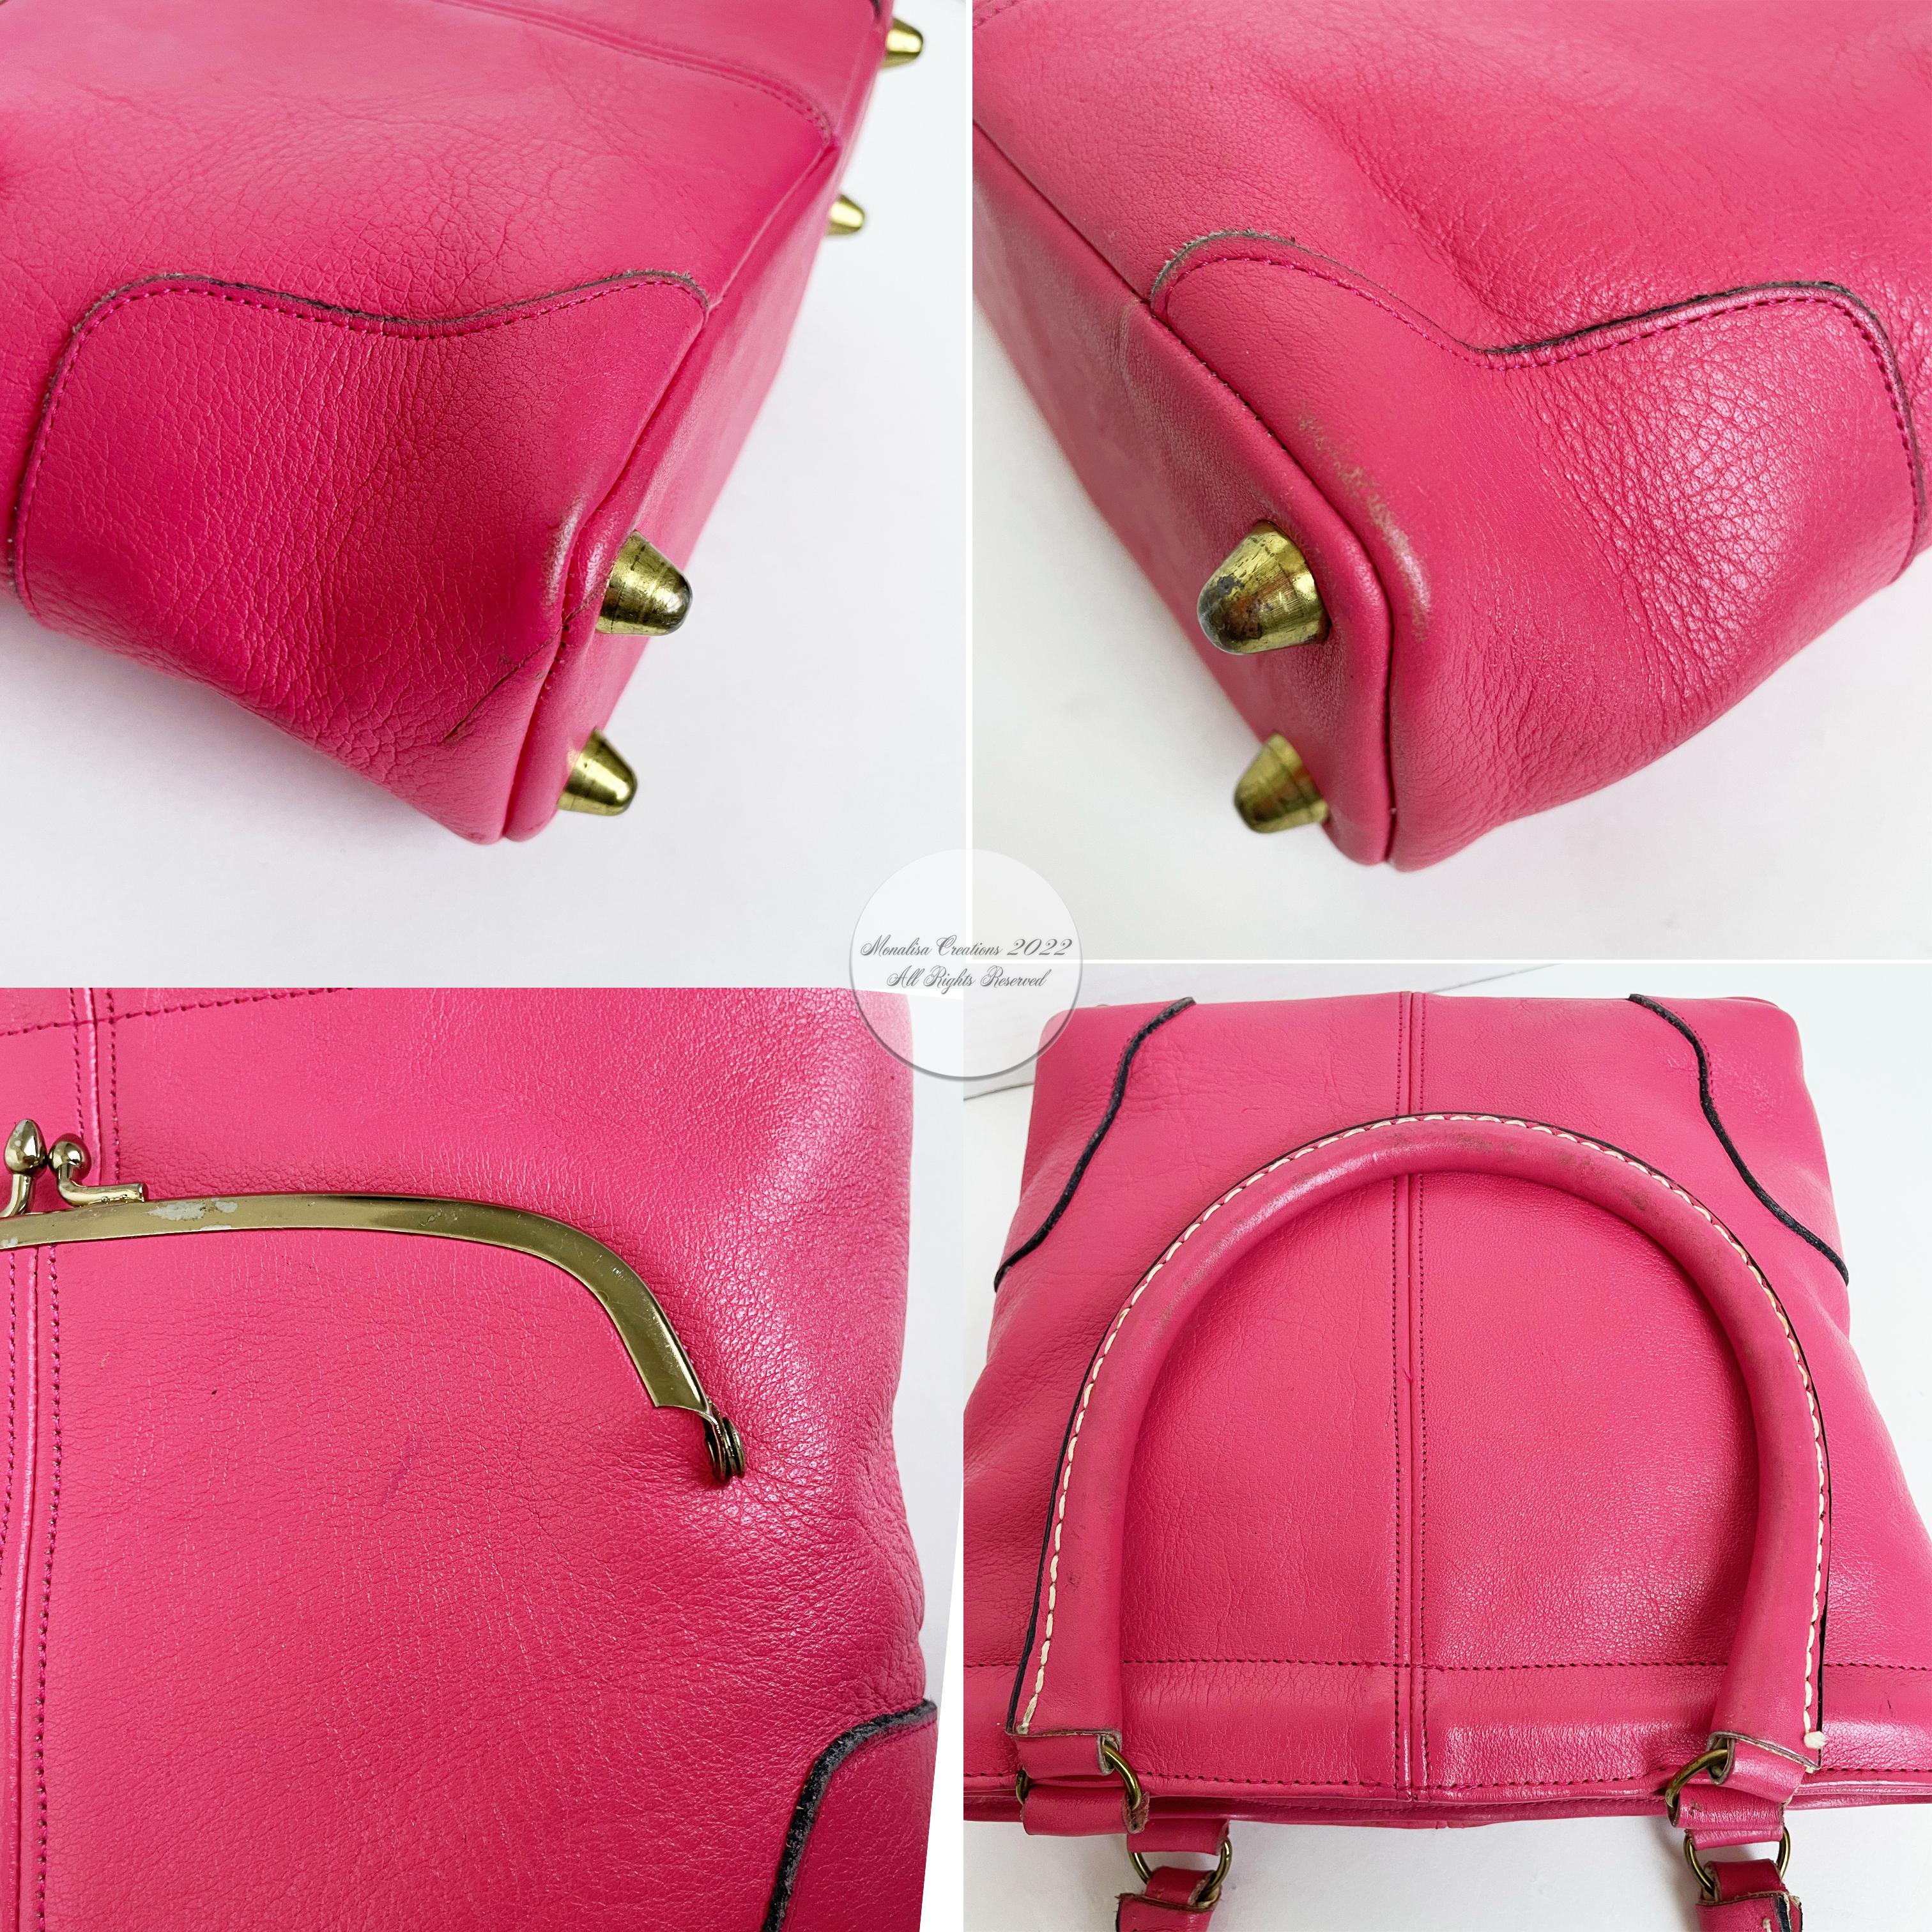 Bonnie Cashin for Coach Kiss Lock Tote Rare Pink Leather Vintage 60s 1